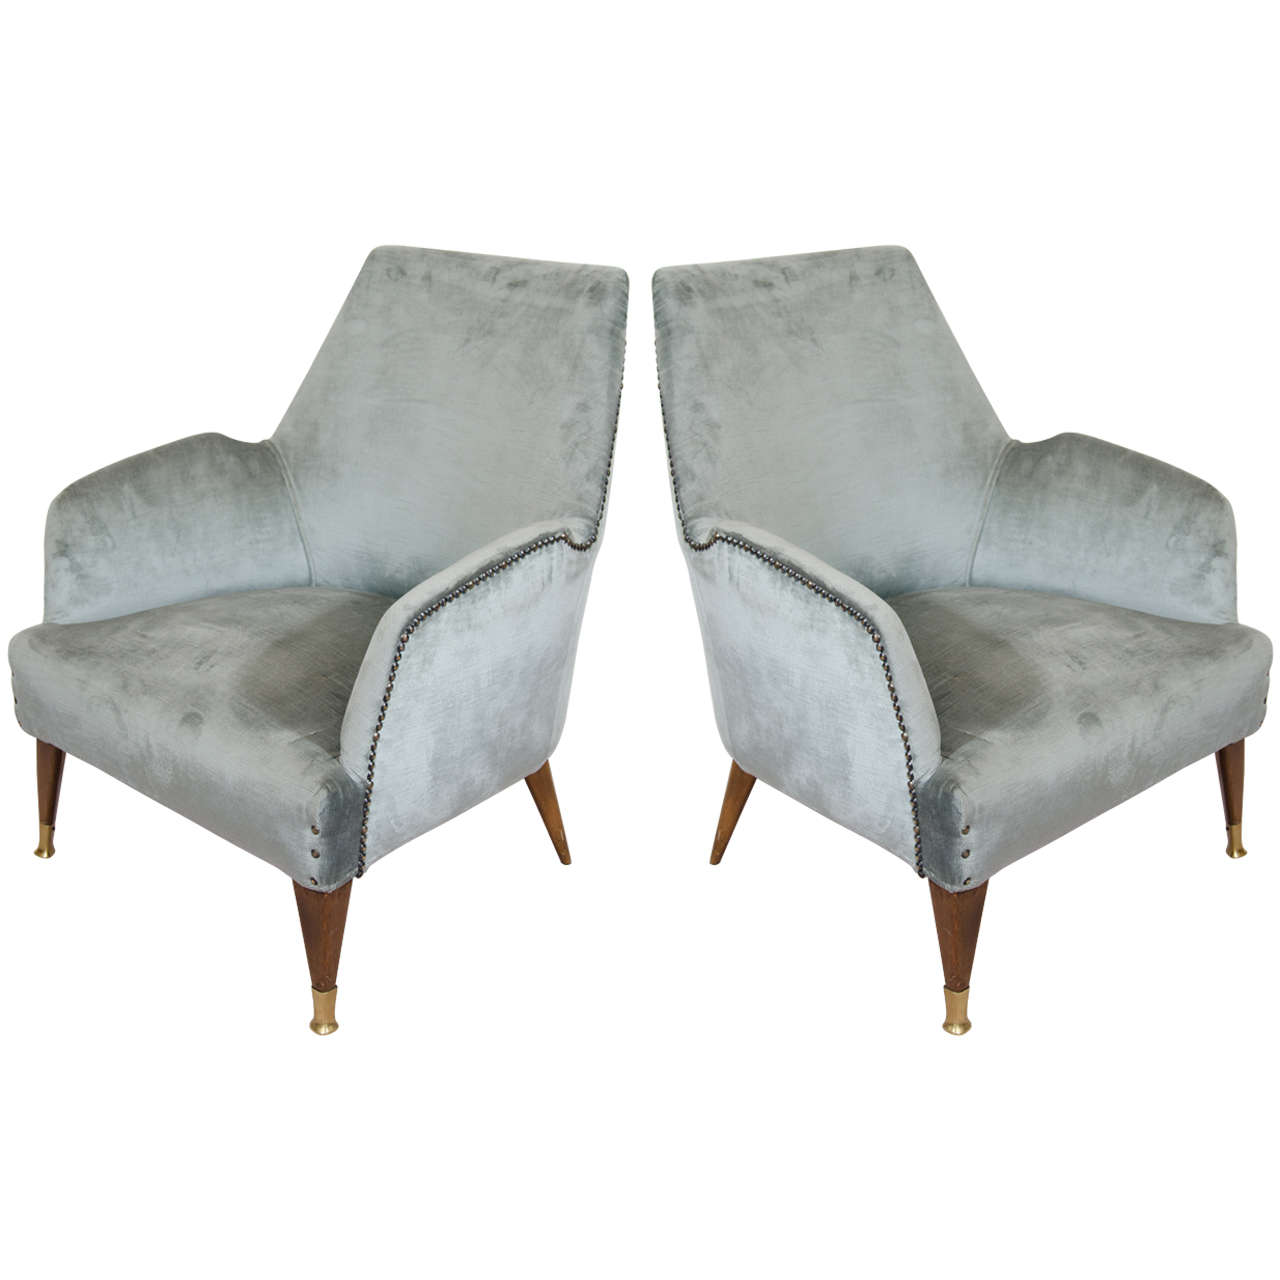 Midcentury Pair of Aqua Armchairs with Nailhead Detail